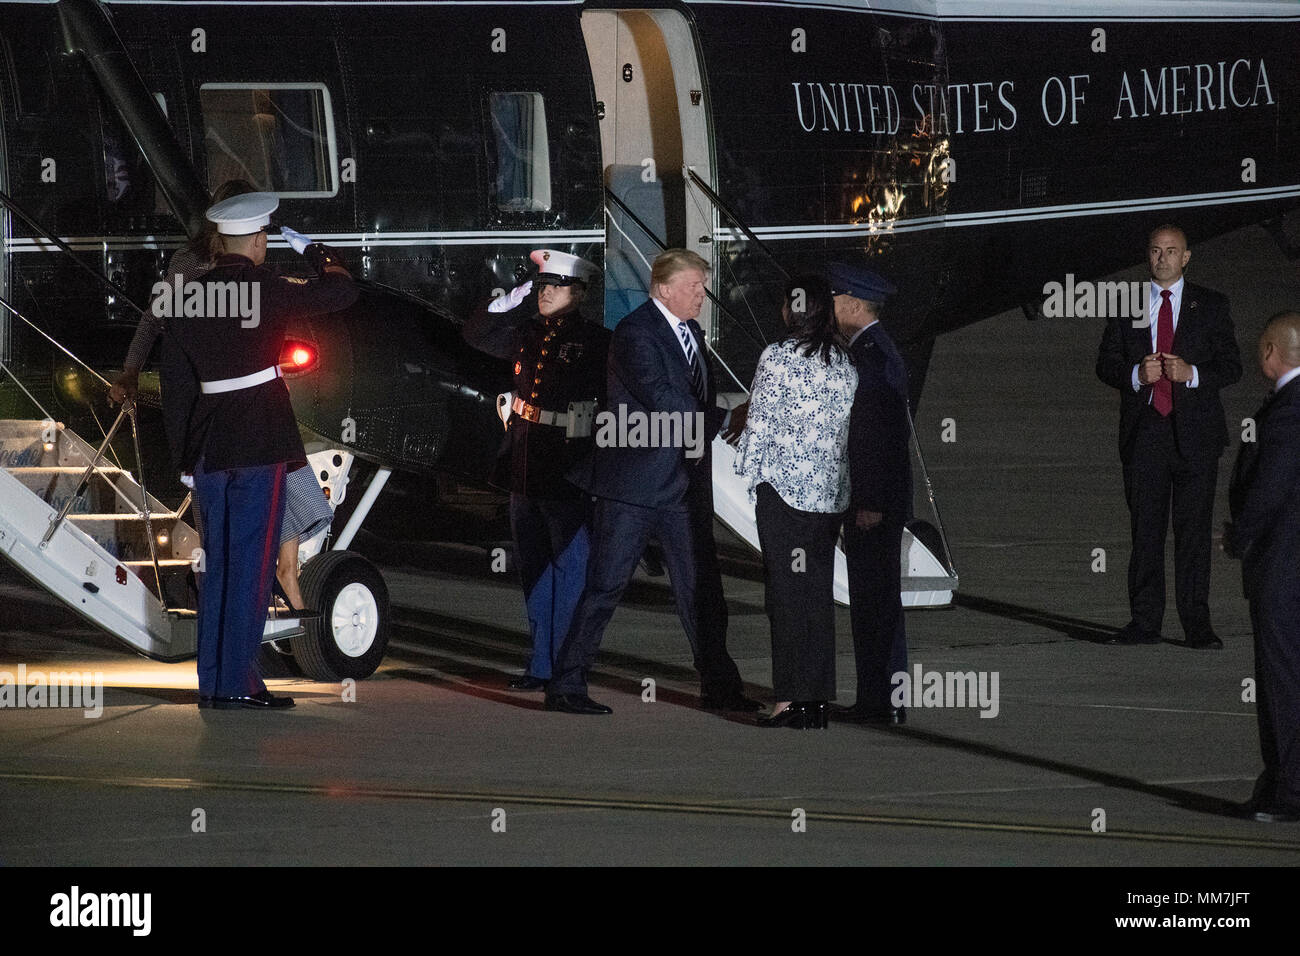 Joint Base Andrews, Maryland, USA. 10th May, 2018. United States President Donald J. Trump arrives at Joint Base Andrews in Maryland to welcome Kim Dong Chul, Kim Hak Song and Tony Kim back to the US on Thursday, May 10, 2018. The three men were imprisoned in North Korea for periods ranging from one and two years. Credit: dpa picture alliance/Alamy Live News Stock Photo